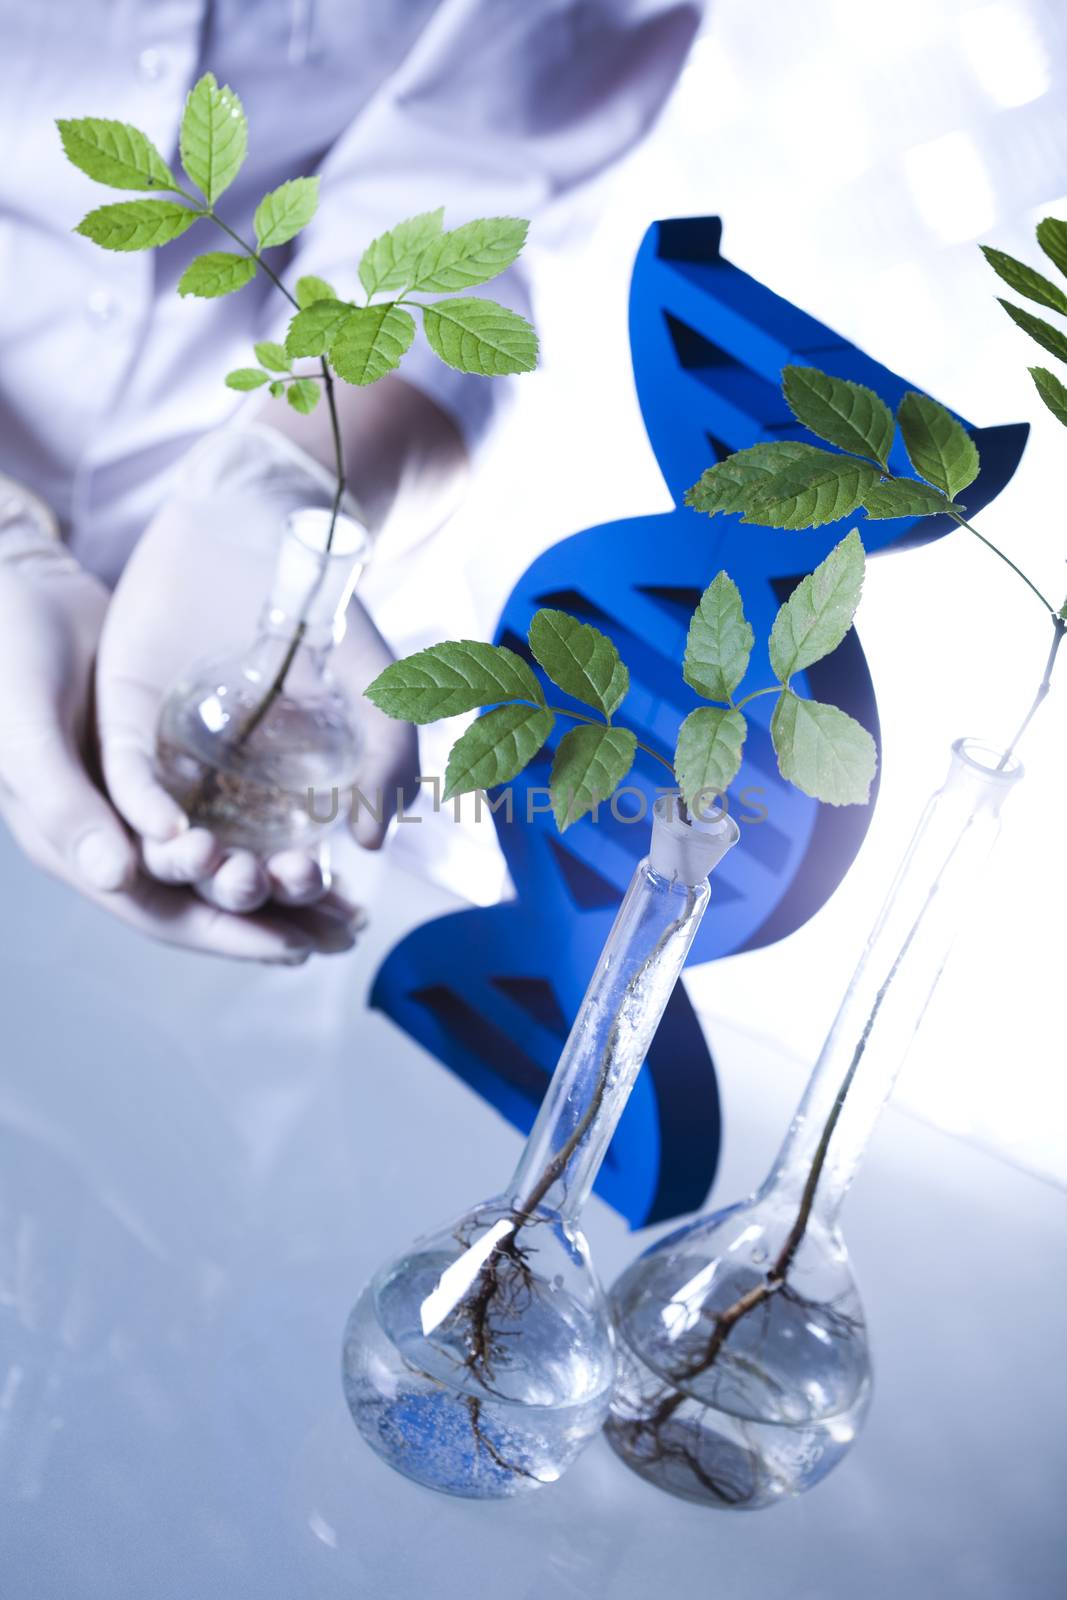 Plant in a test tube in hands of the scientist by JanPietruszka